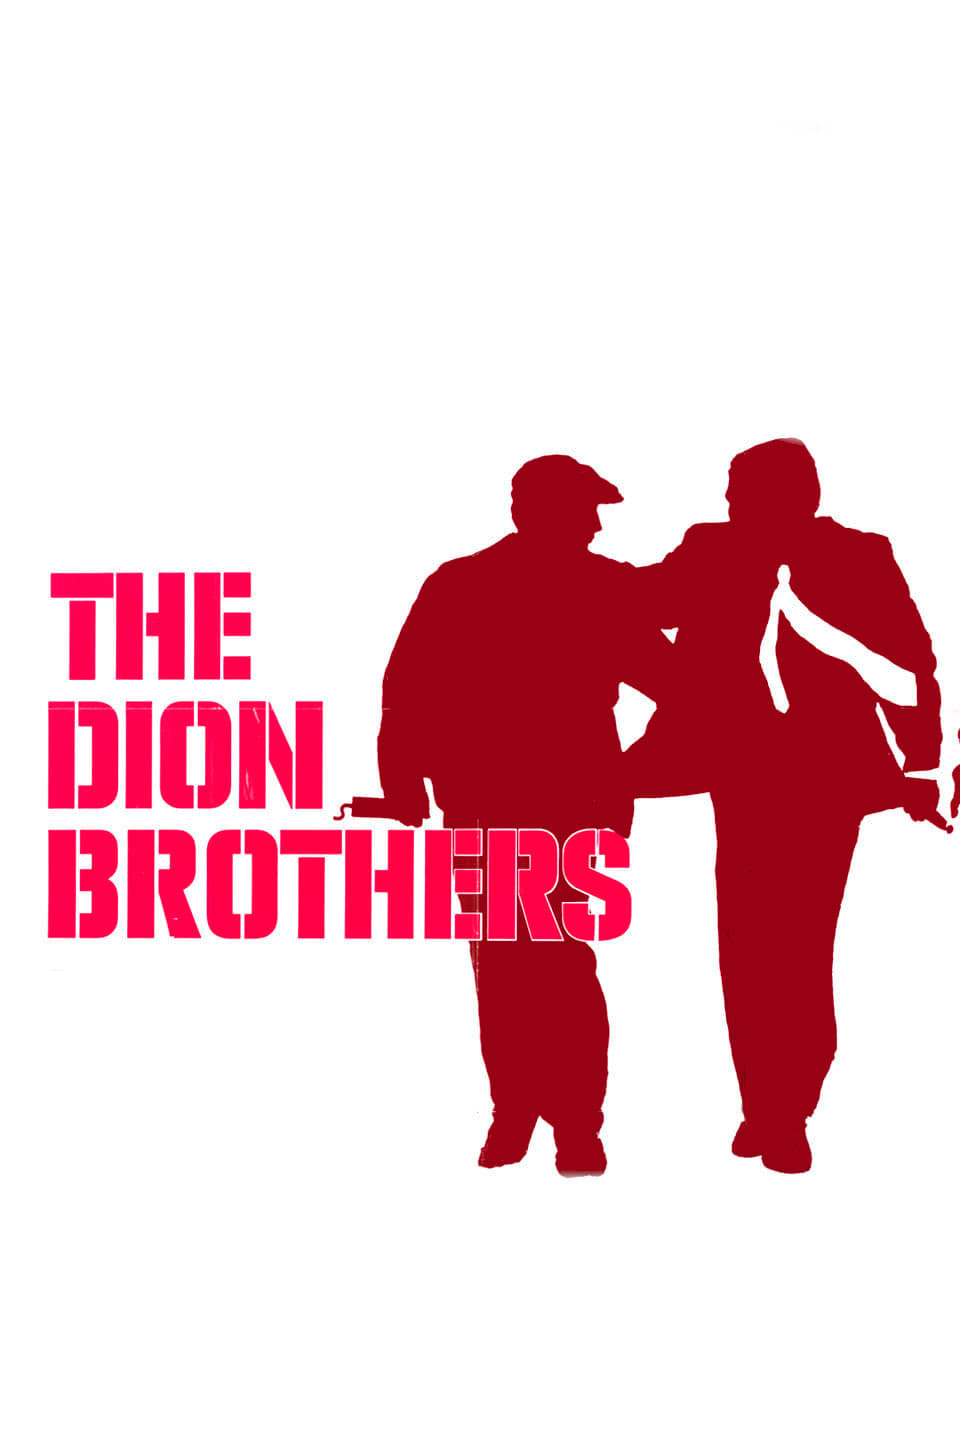 The Dion Brothers (1974)